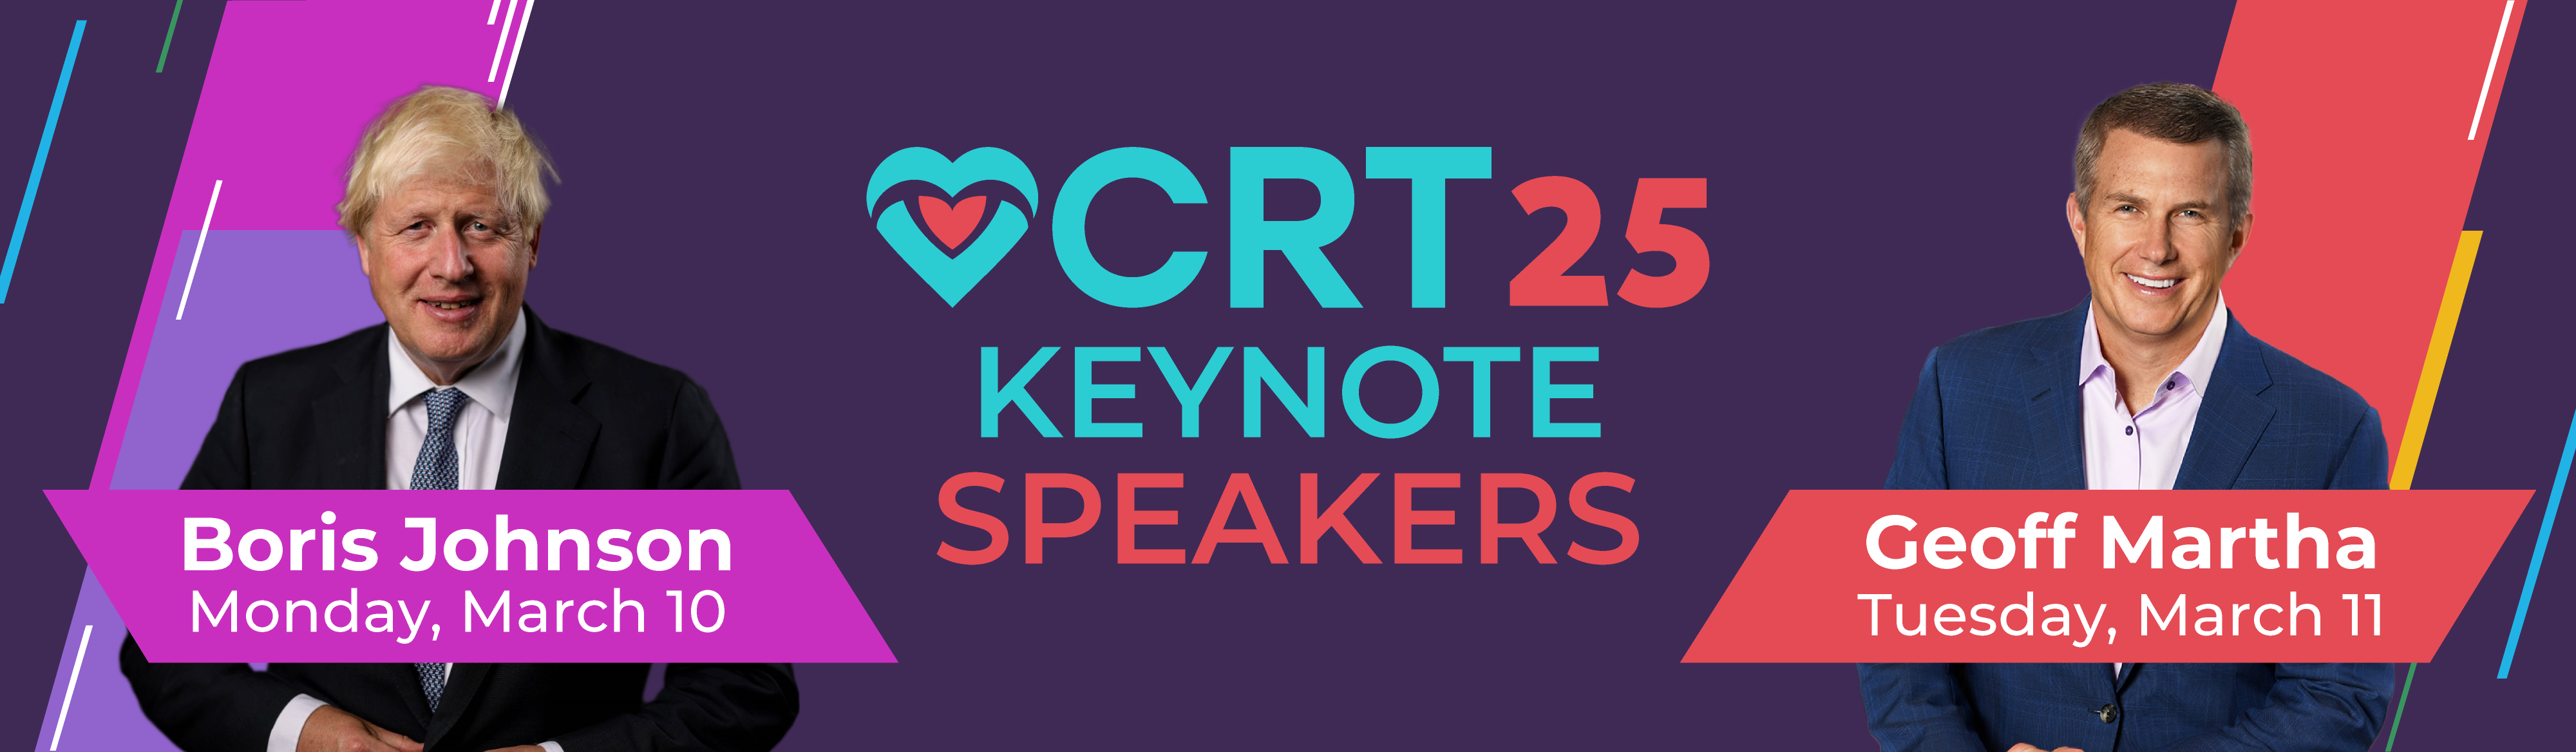 Cardiology Conference CRT25 Keynote Speaker Boris Johnson, Prime Minister of the United Kingdom, presenting in Washington DC on Monday, May 10, 2025. Engage with cutting-edge cardiovascular research and technology advancements. #CRT25 #Cardiology #KeynoteSpeaker #BorisJohnson #WashingtonDC